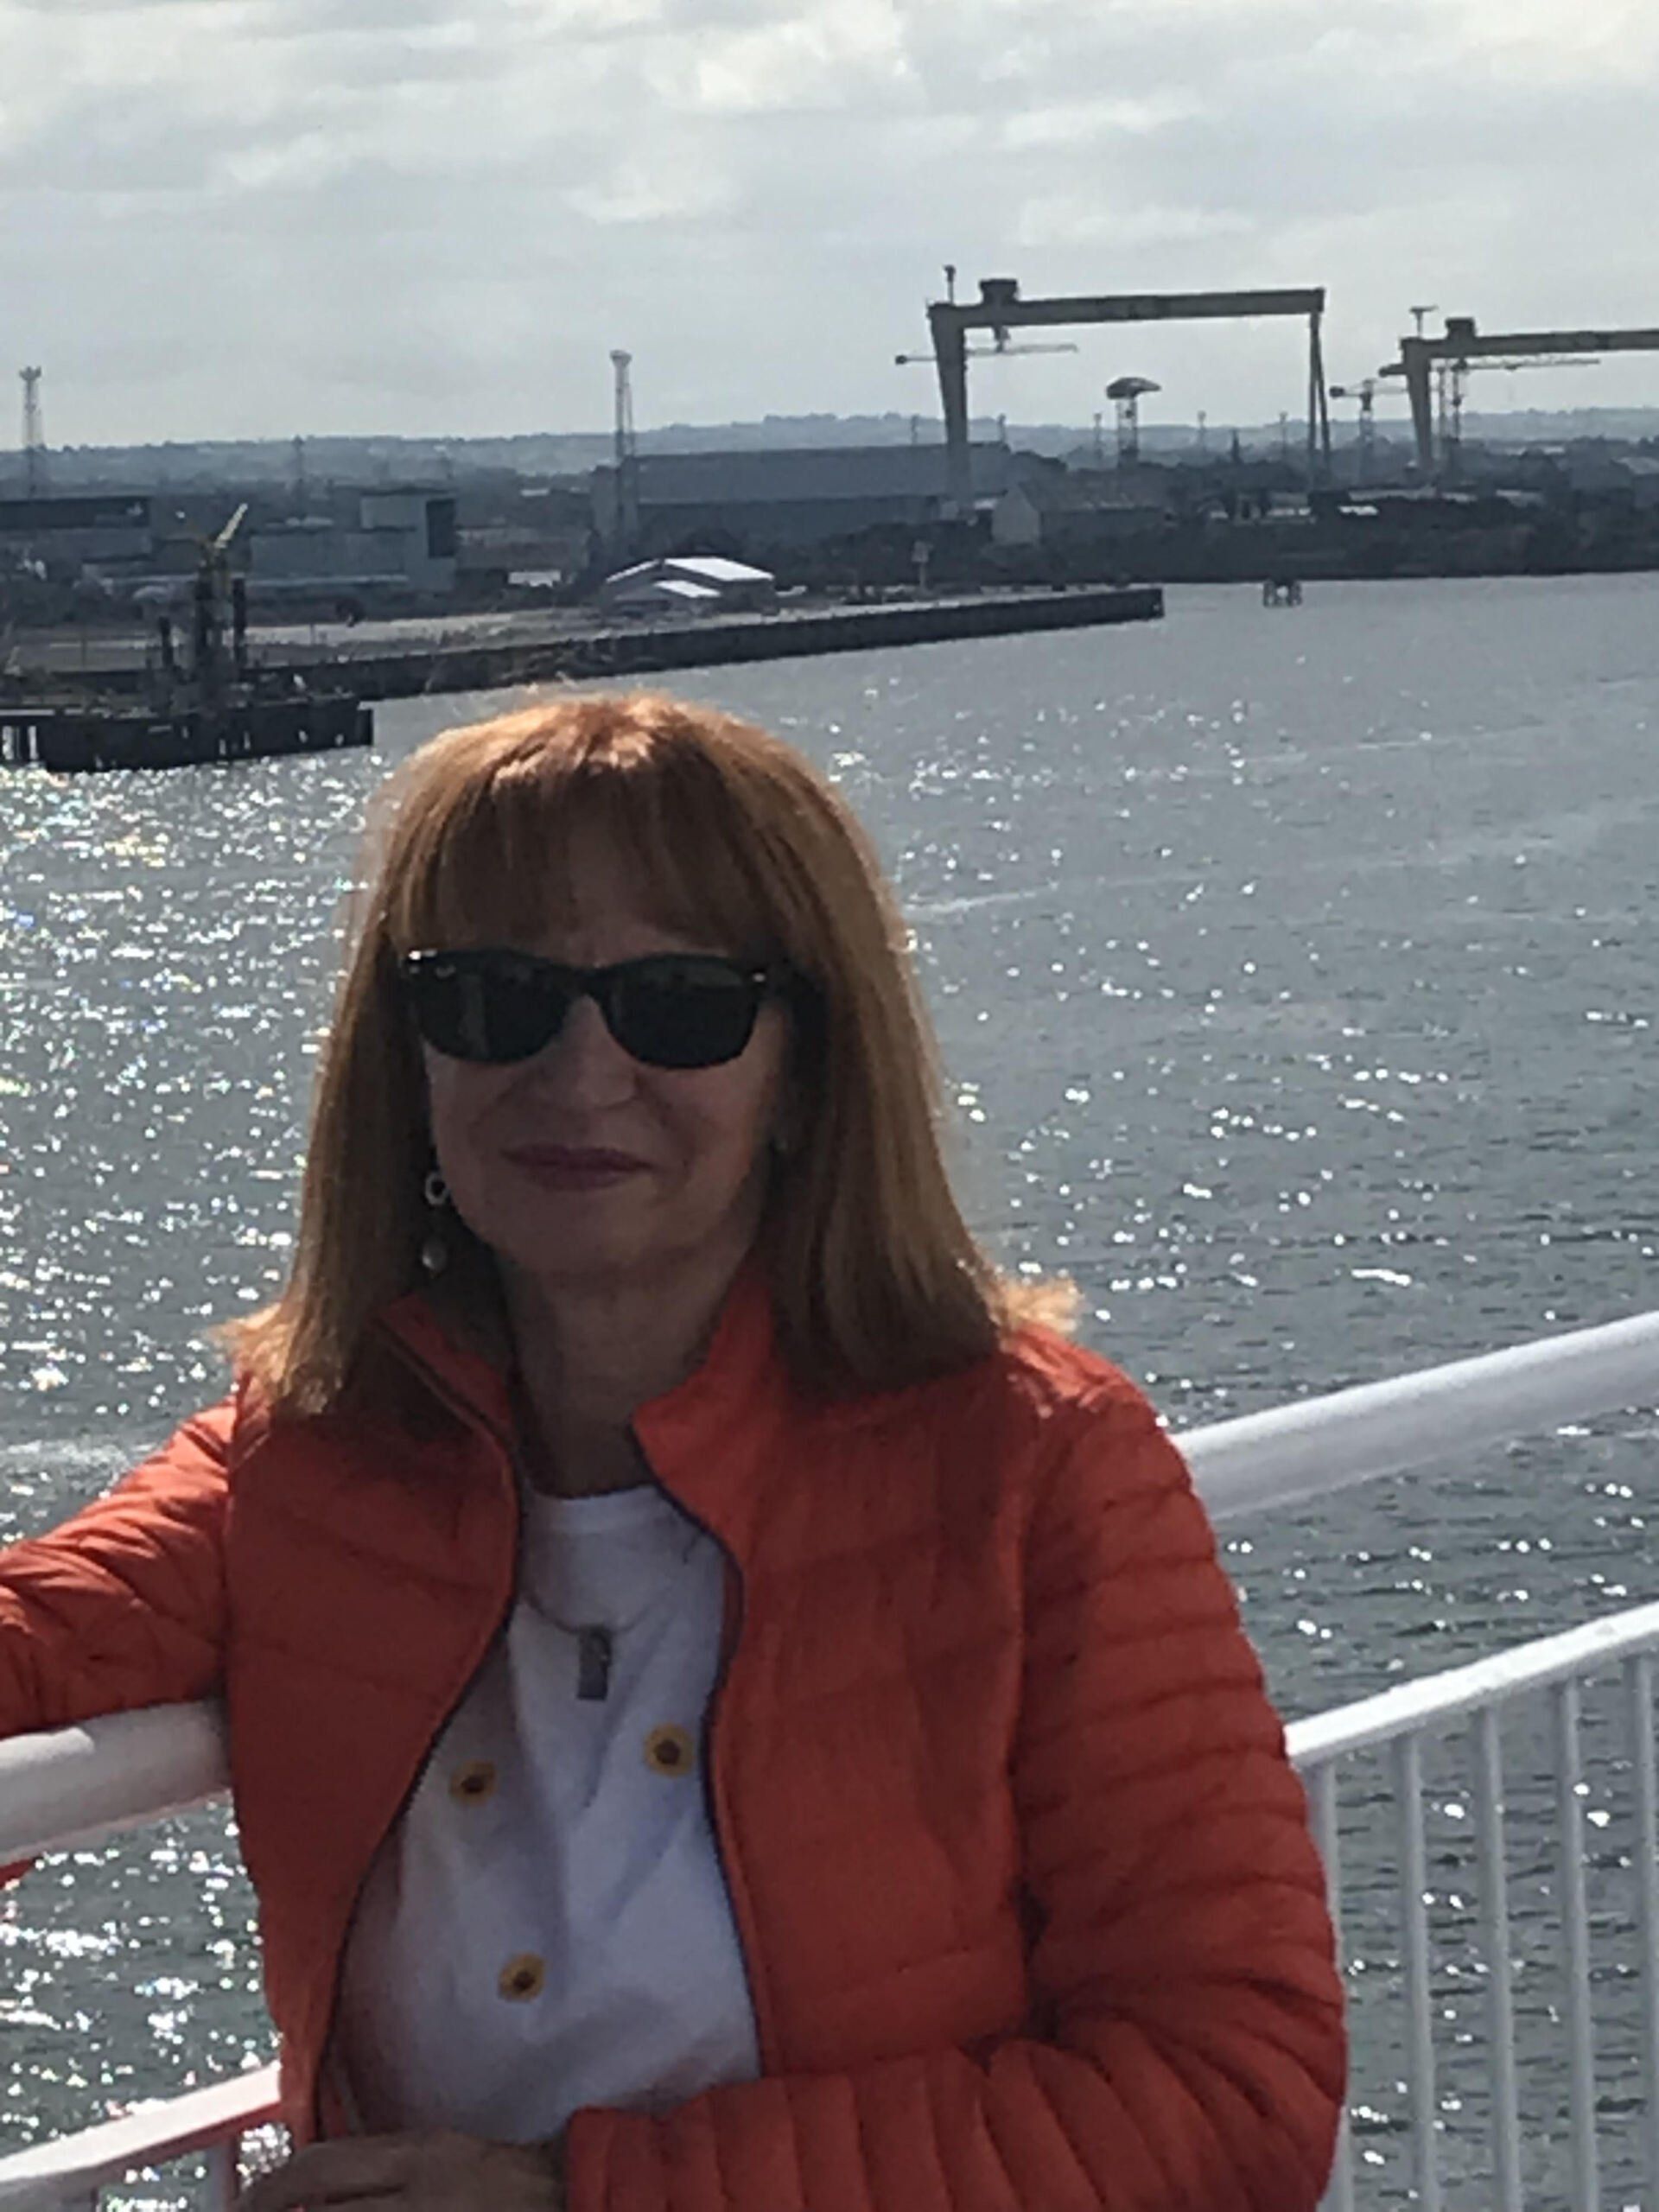 Una, with shoulder length hair and wearing sunglasses. She is standing next to railings with water and a ship yard in the background.